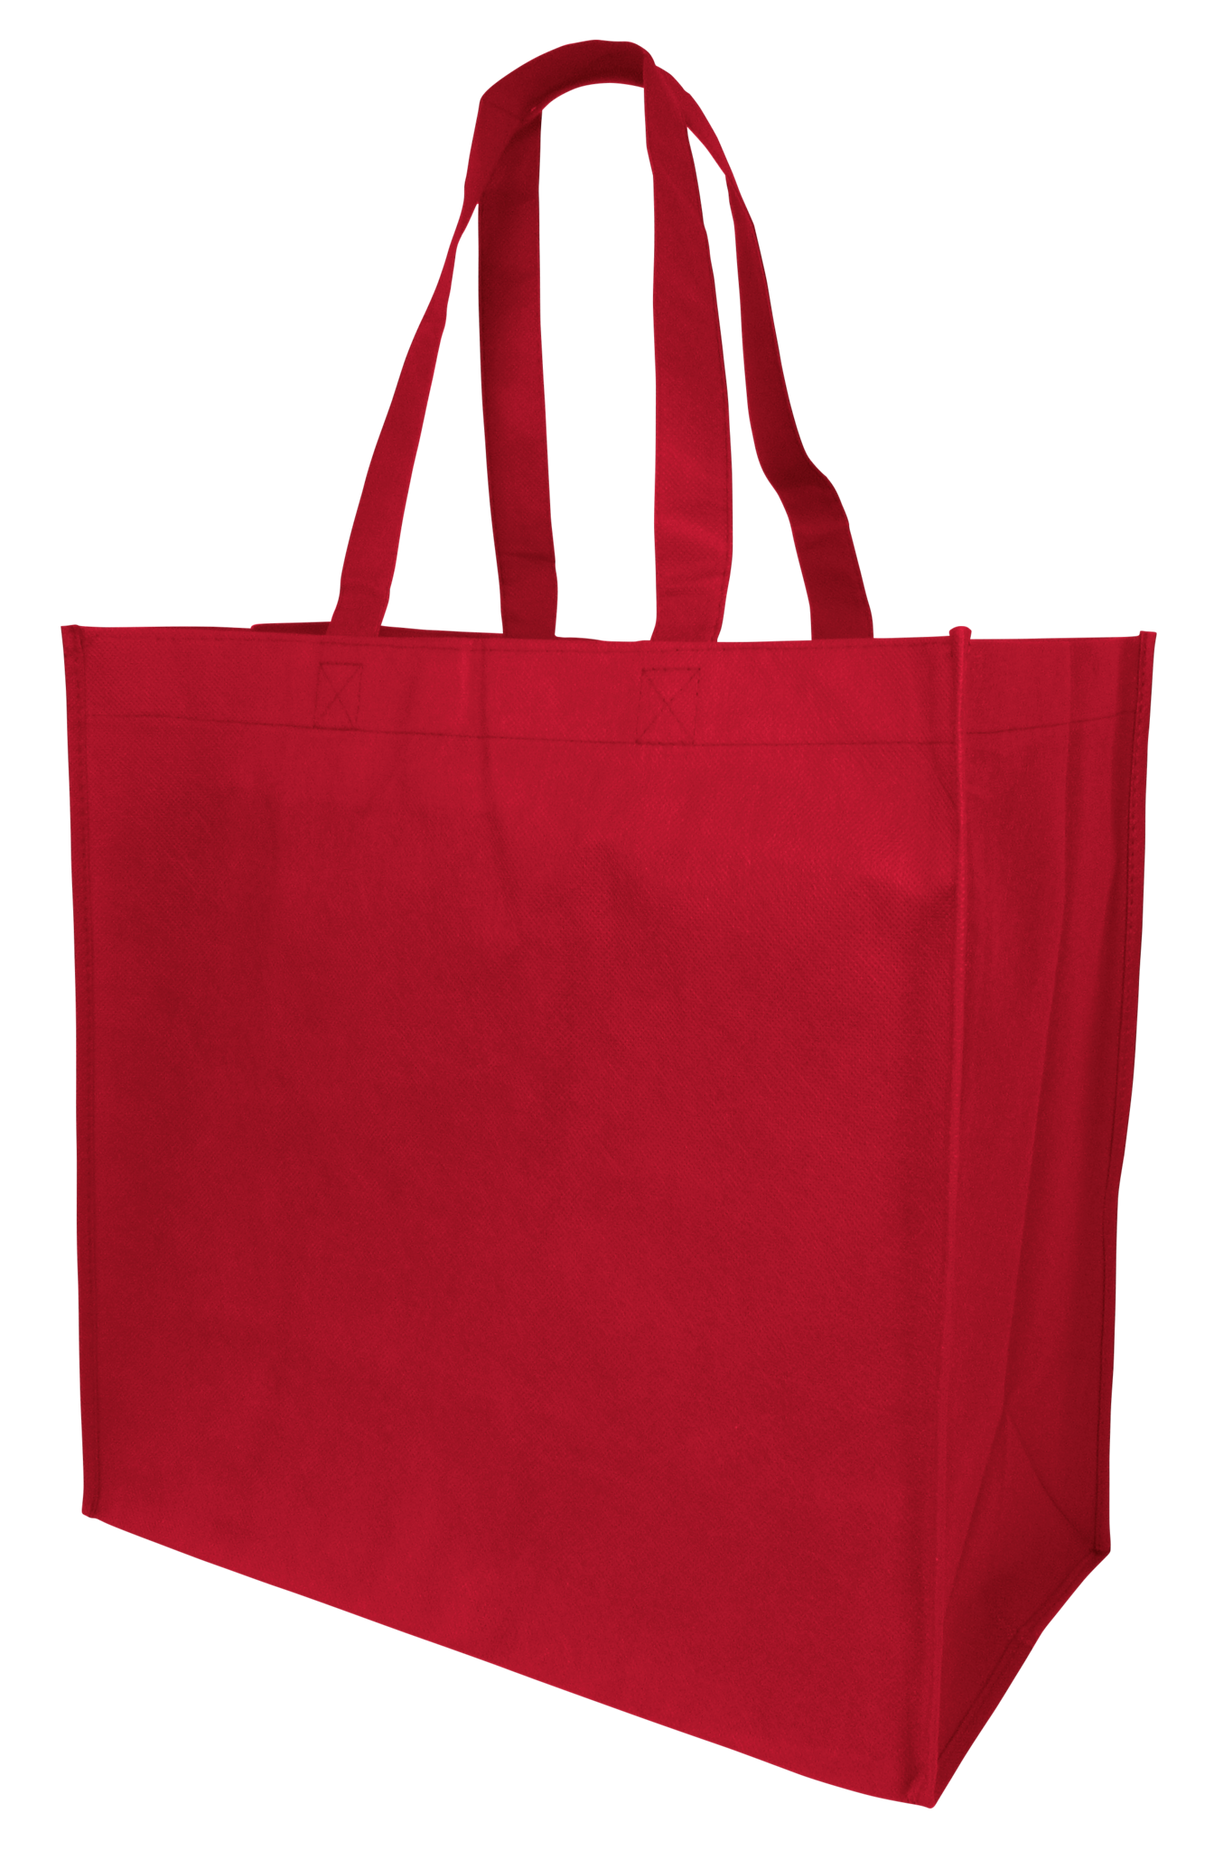 Jumbo Promotional Tote Bags RED